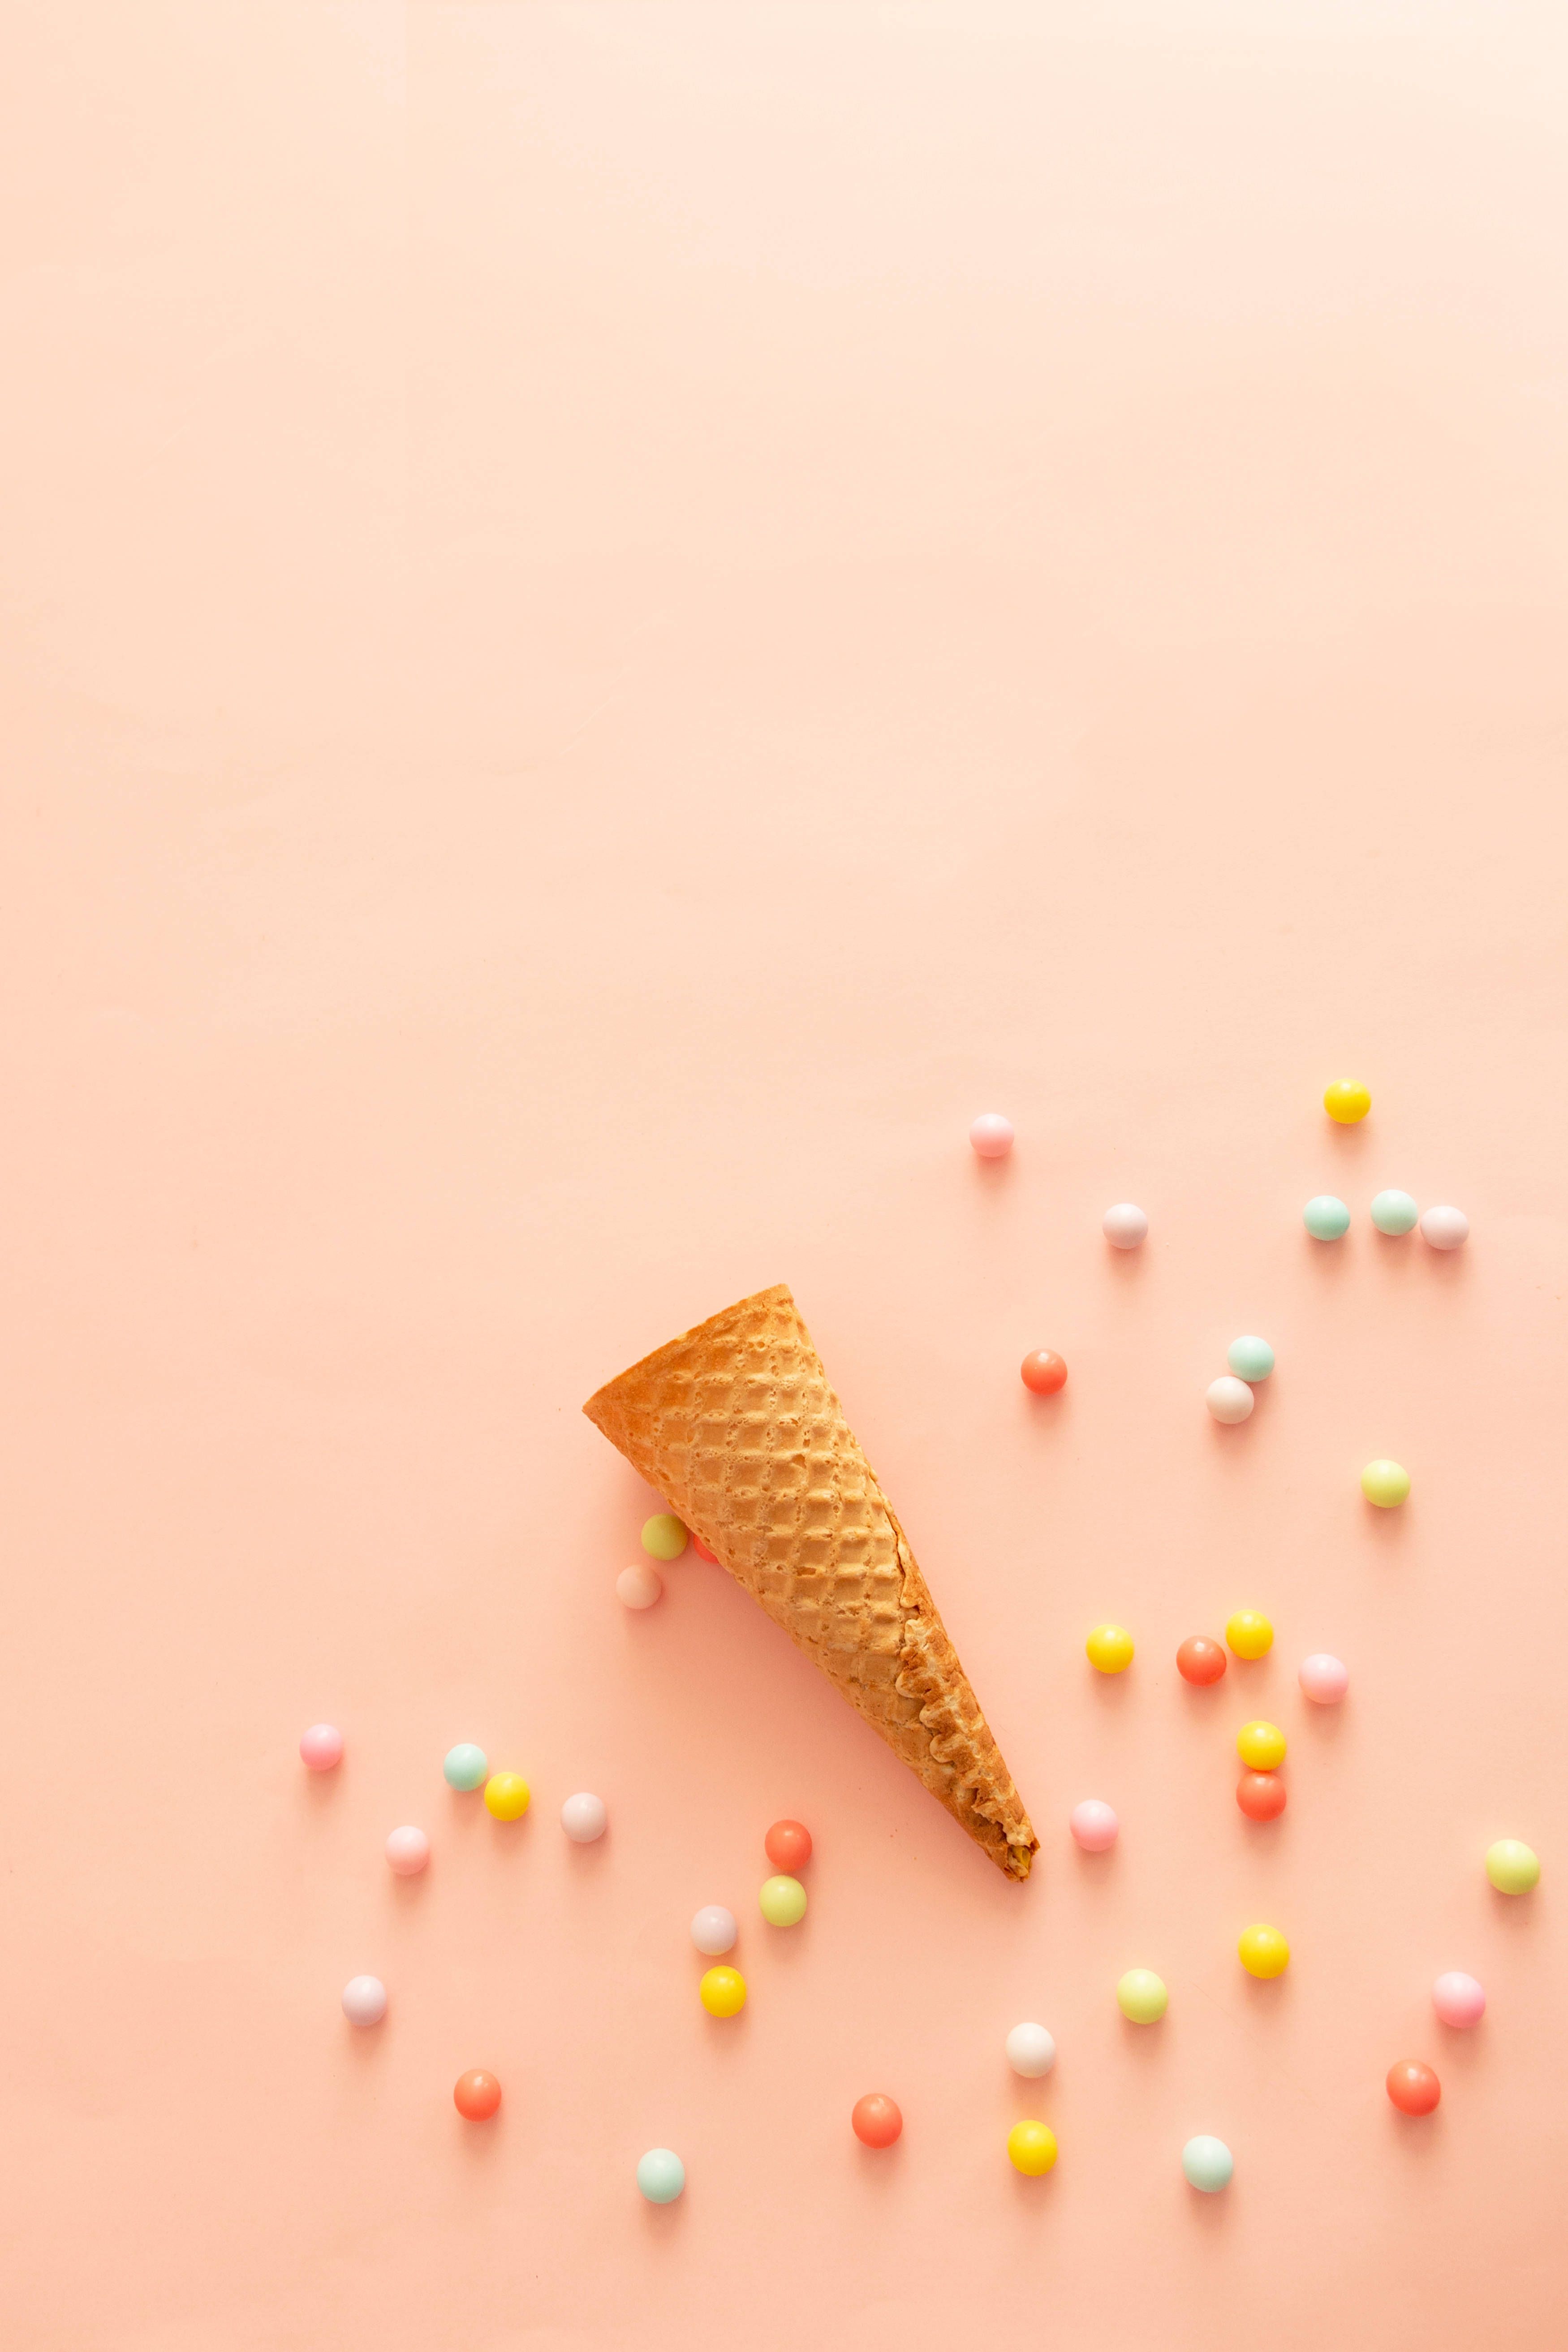 Download Sweet Candies And Ice Cream Cone Wallpaper